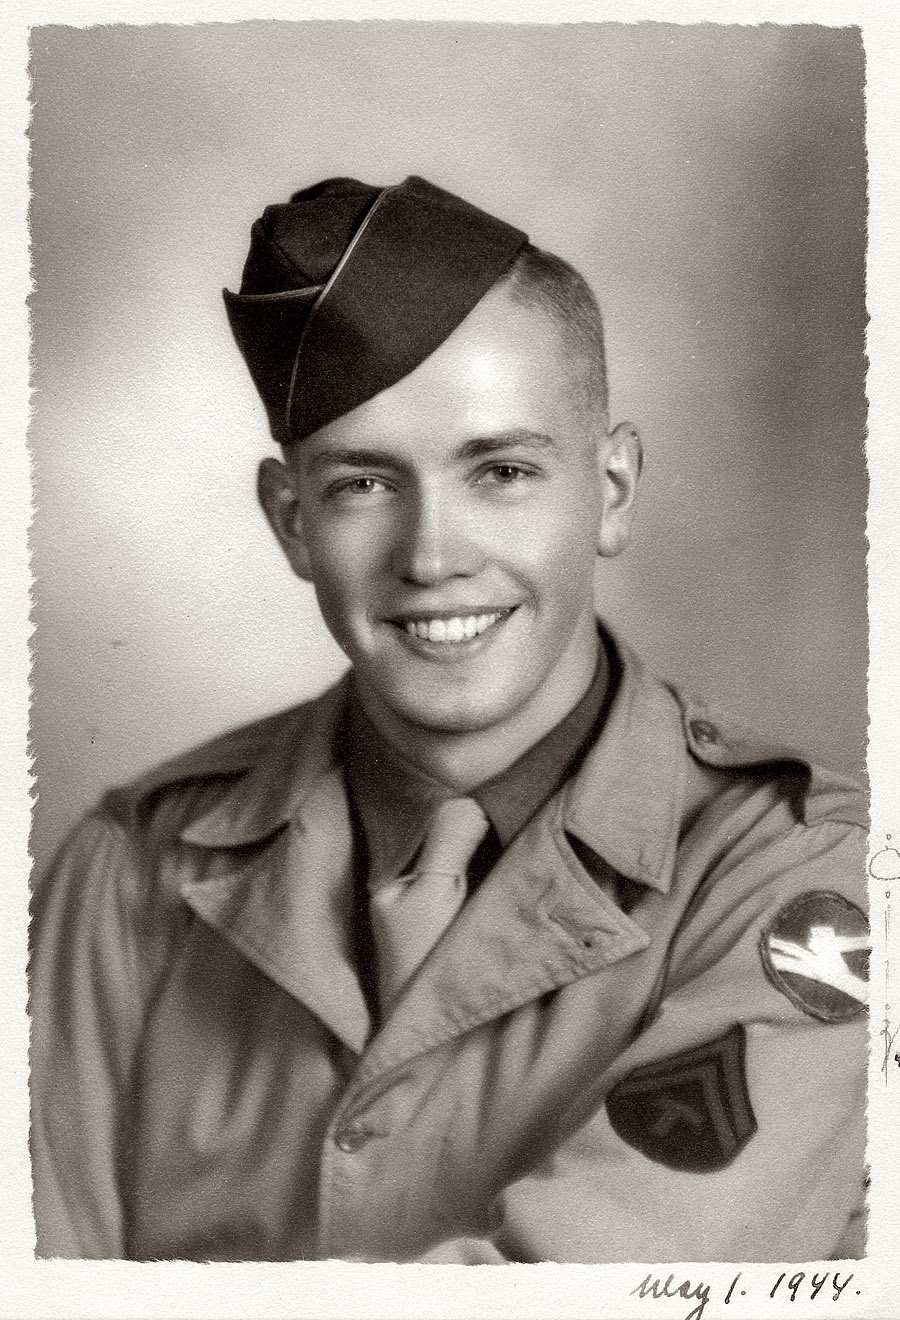 My father, taken about four and a half months before his division, the 84th Infantry, embarked for Europe.  The 84th entered combat in November 1944 and fought in three campaigns until V-E Day.  T5 Jensen ended the war as a Master Sergeant and earned the Bronze Star. View full size.